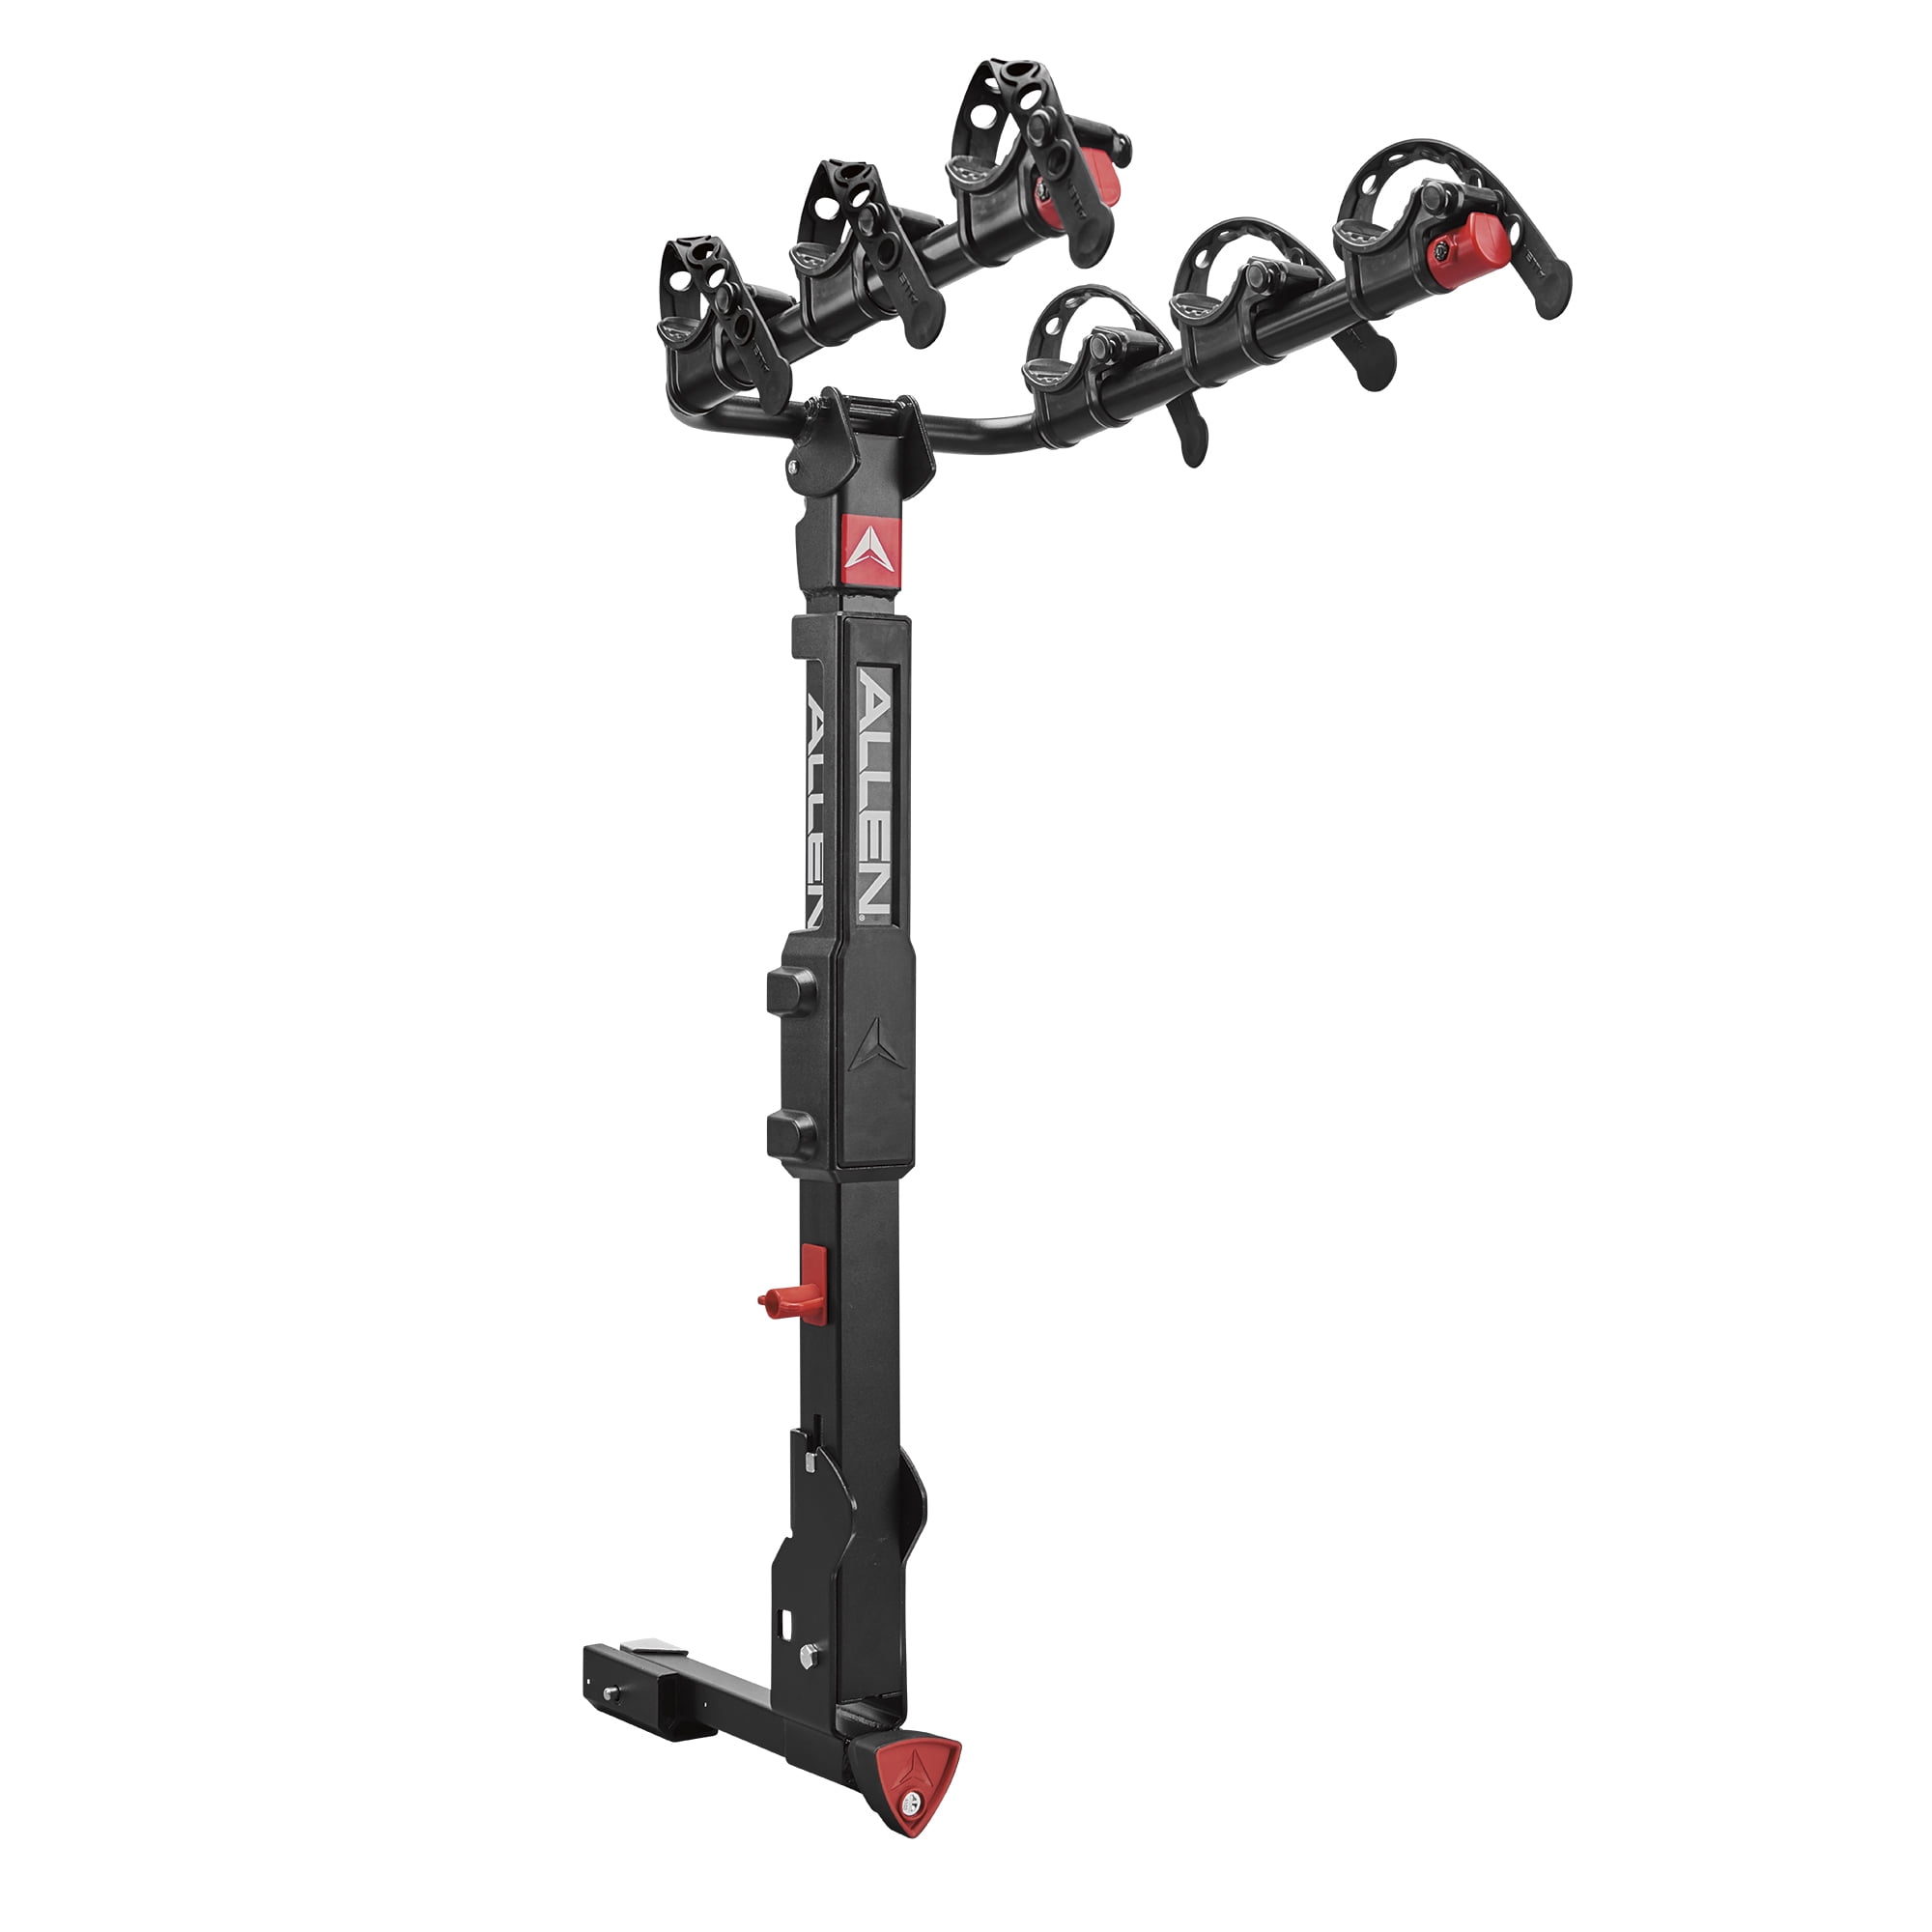 Allen Sports Premier Locking Quick Release 3-Bike Carrier for 2 in. and 1 1/4 in. Hitch Model QR535 Black